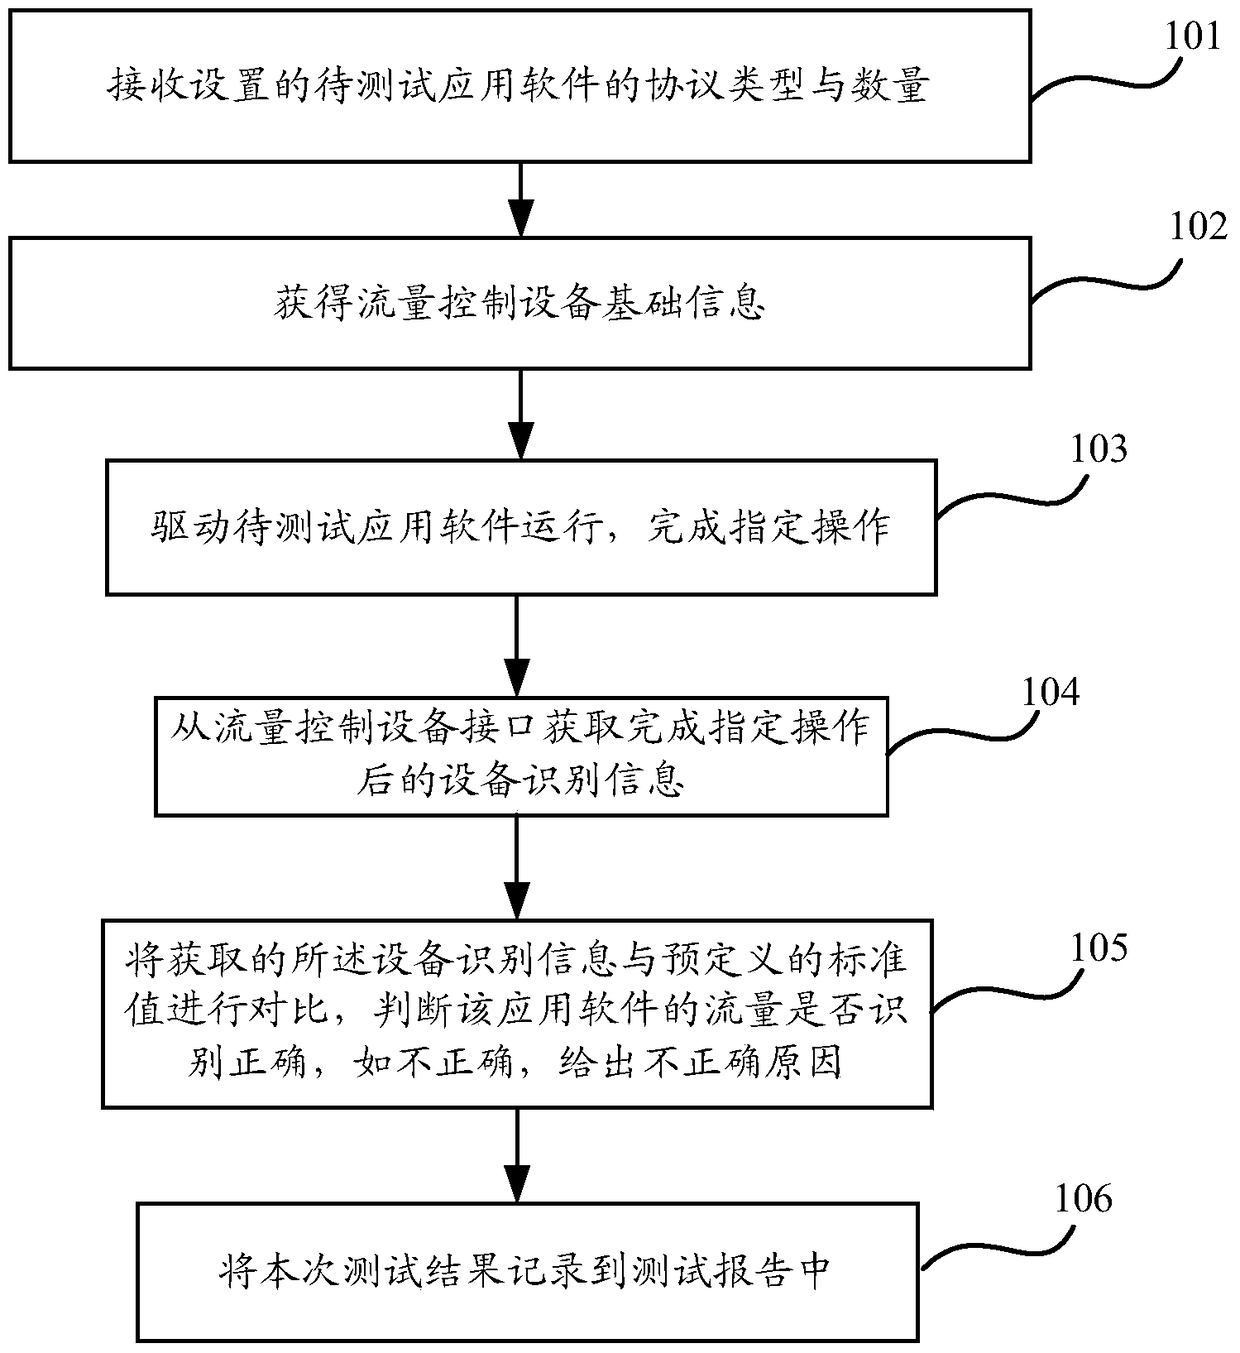 A uft-based application software automatic testing method and system